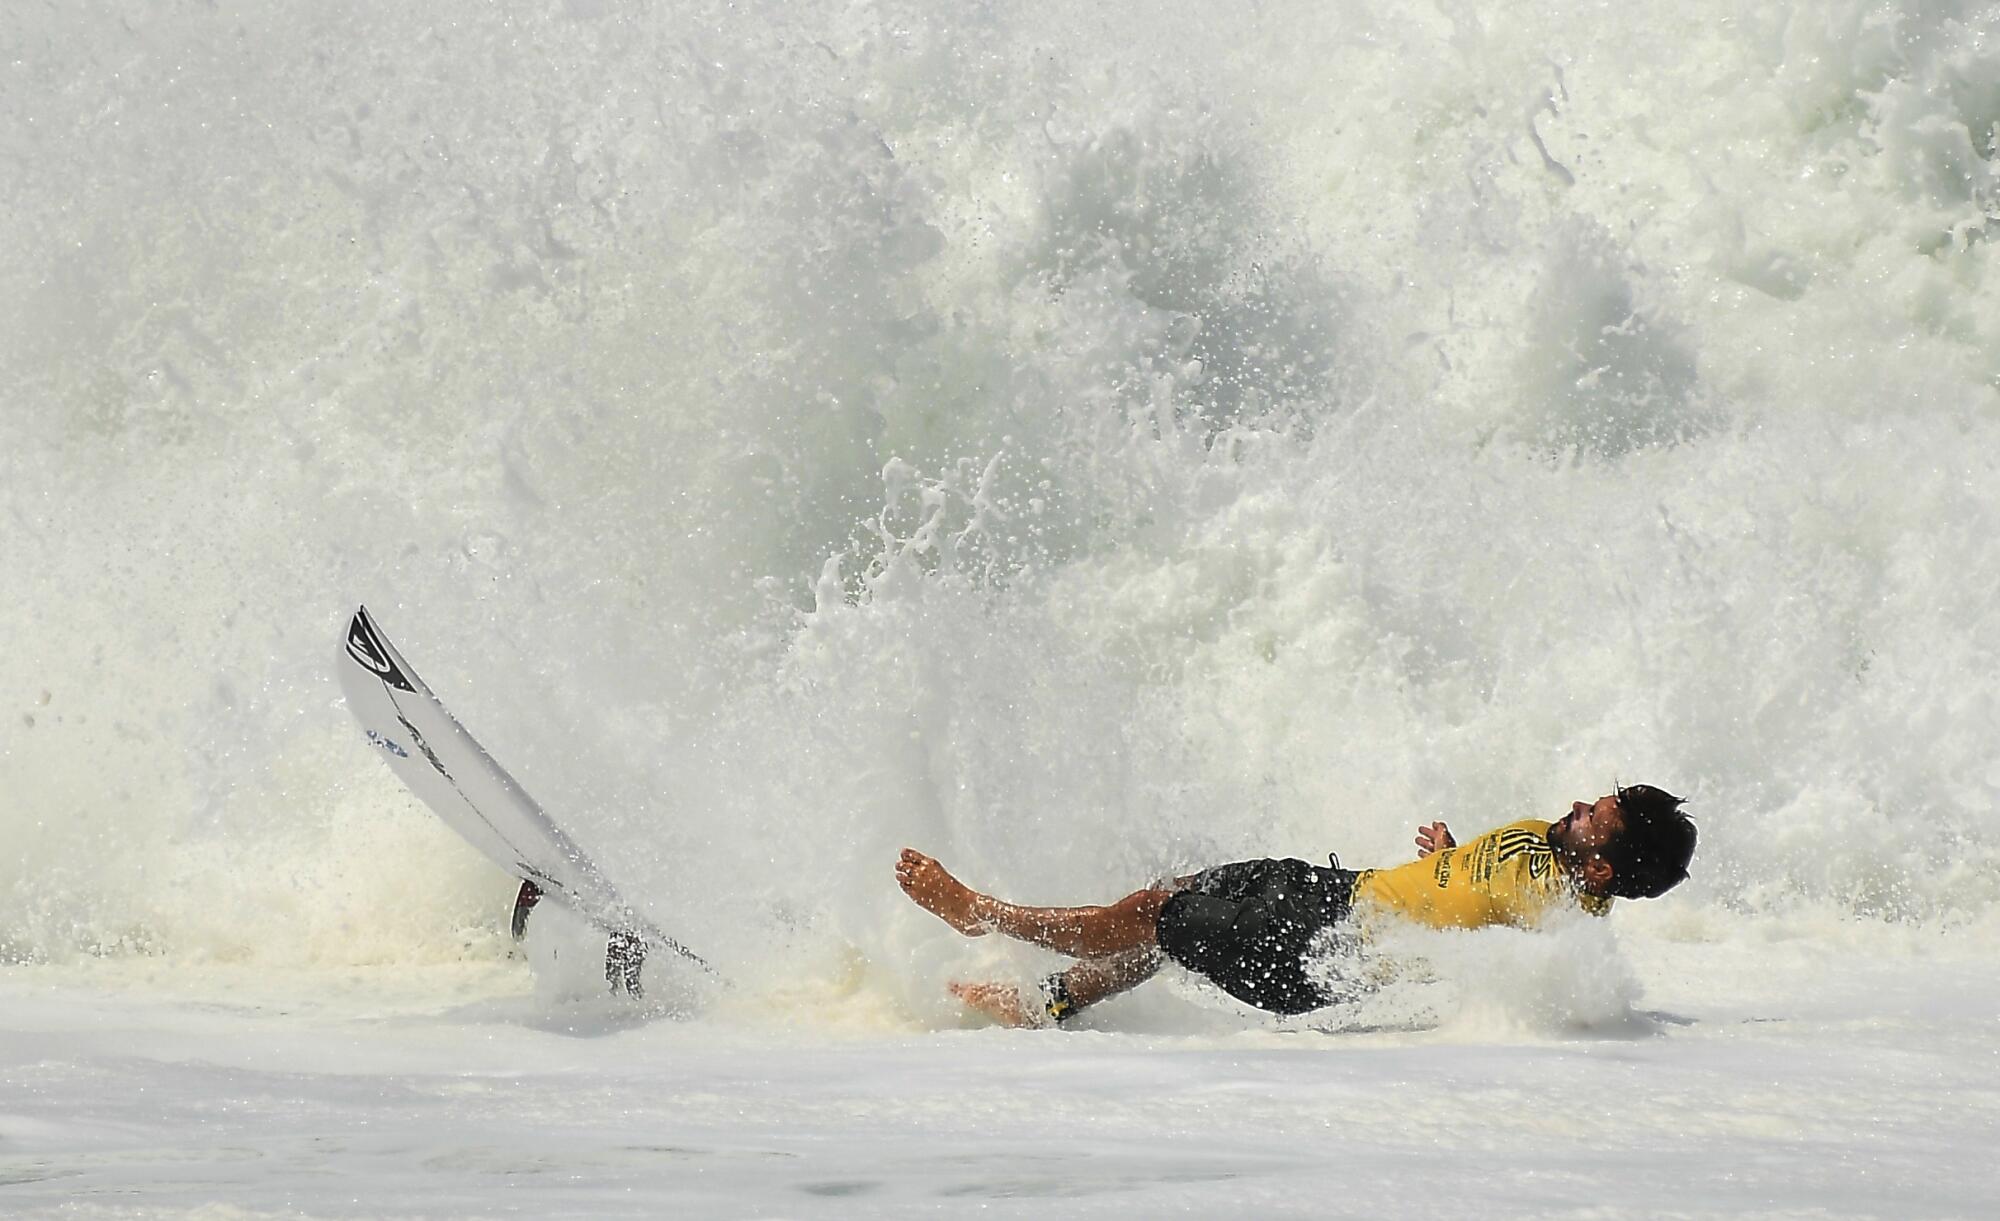 A surfer bails out of a wave in the ISA World Surfing Games at Surf City in El Salvador.